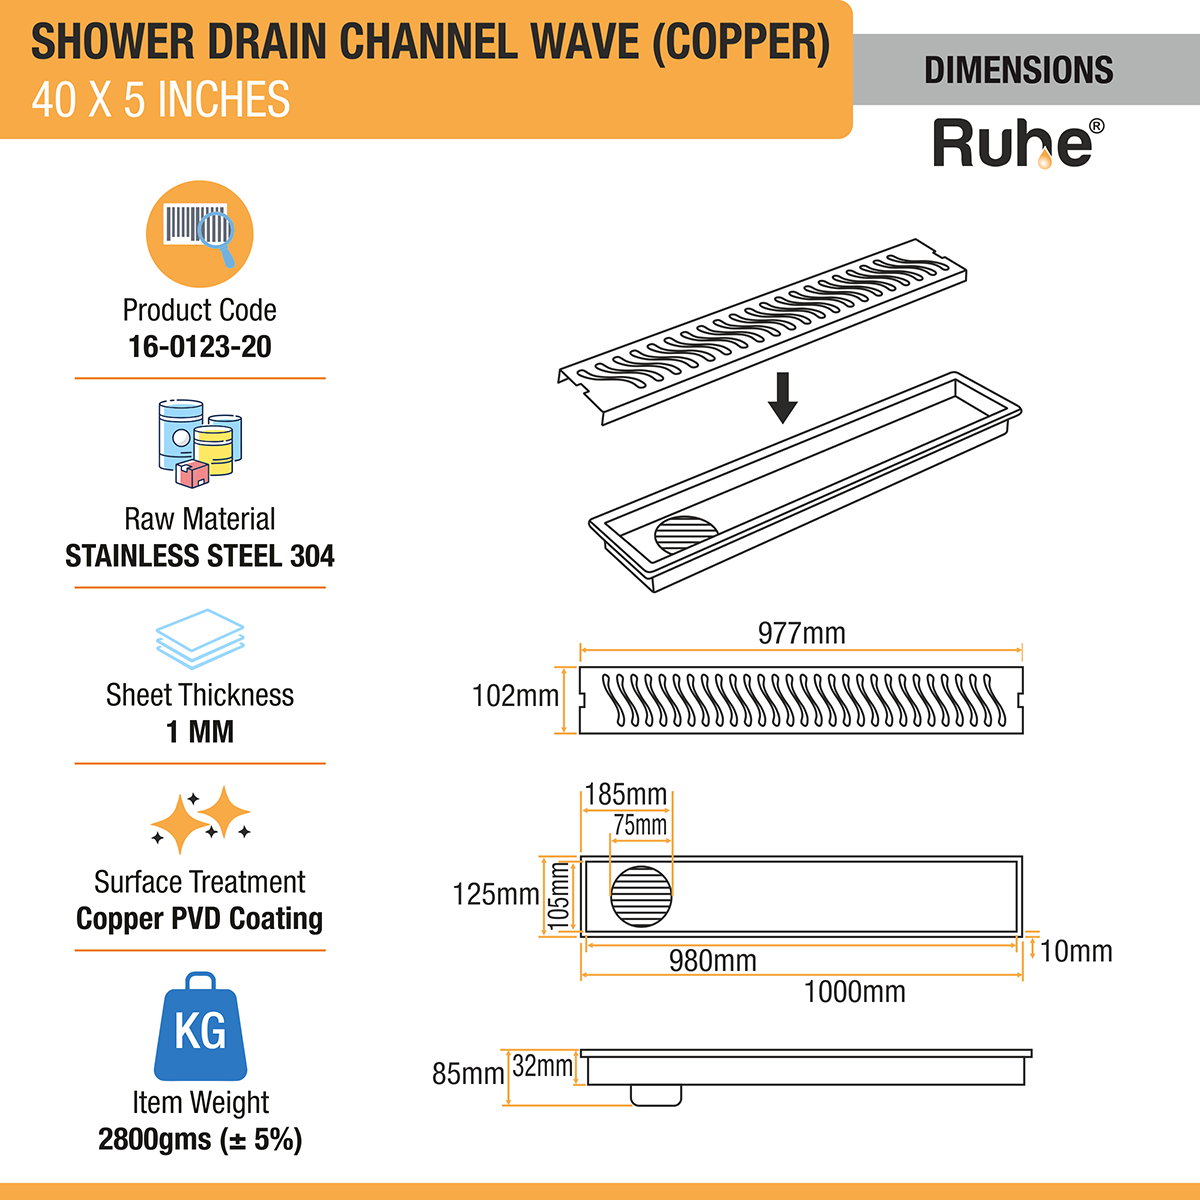 Wave Shower Drain Channel (40 x 5 Inches) ROSE GOLD/ANTIQUE COPPER dimensions and size